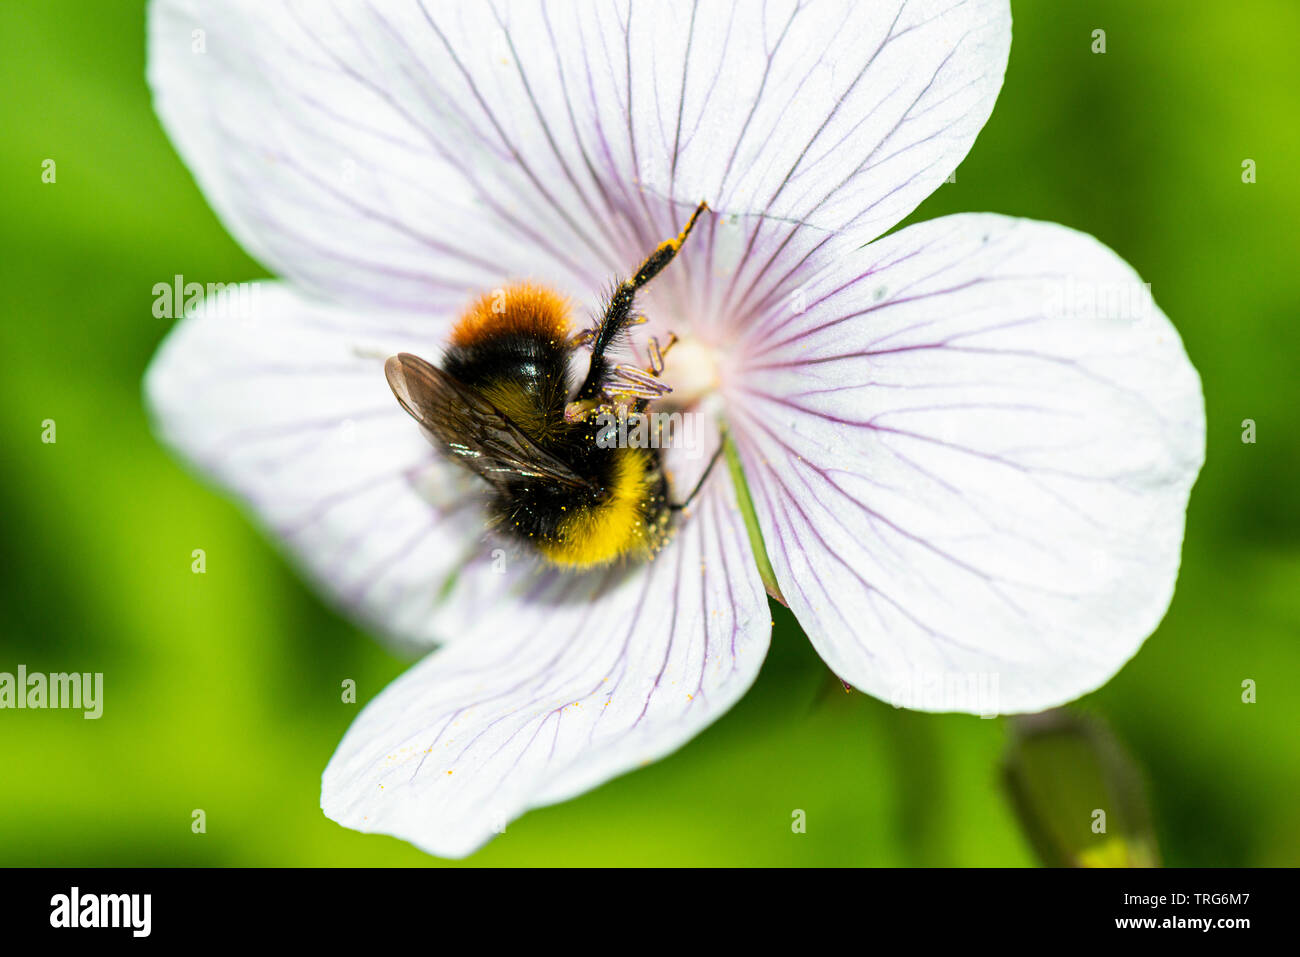 A bumble bee on the flower of a geranium Stock Photo